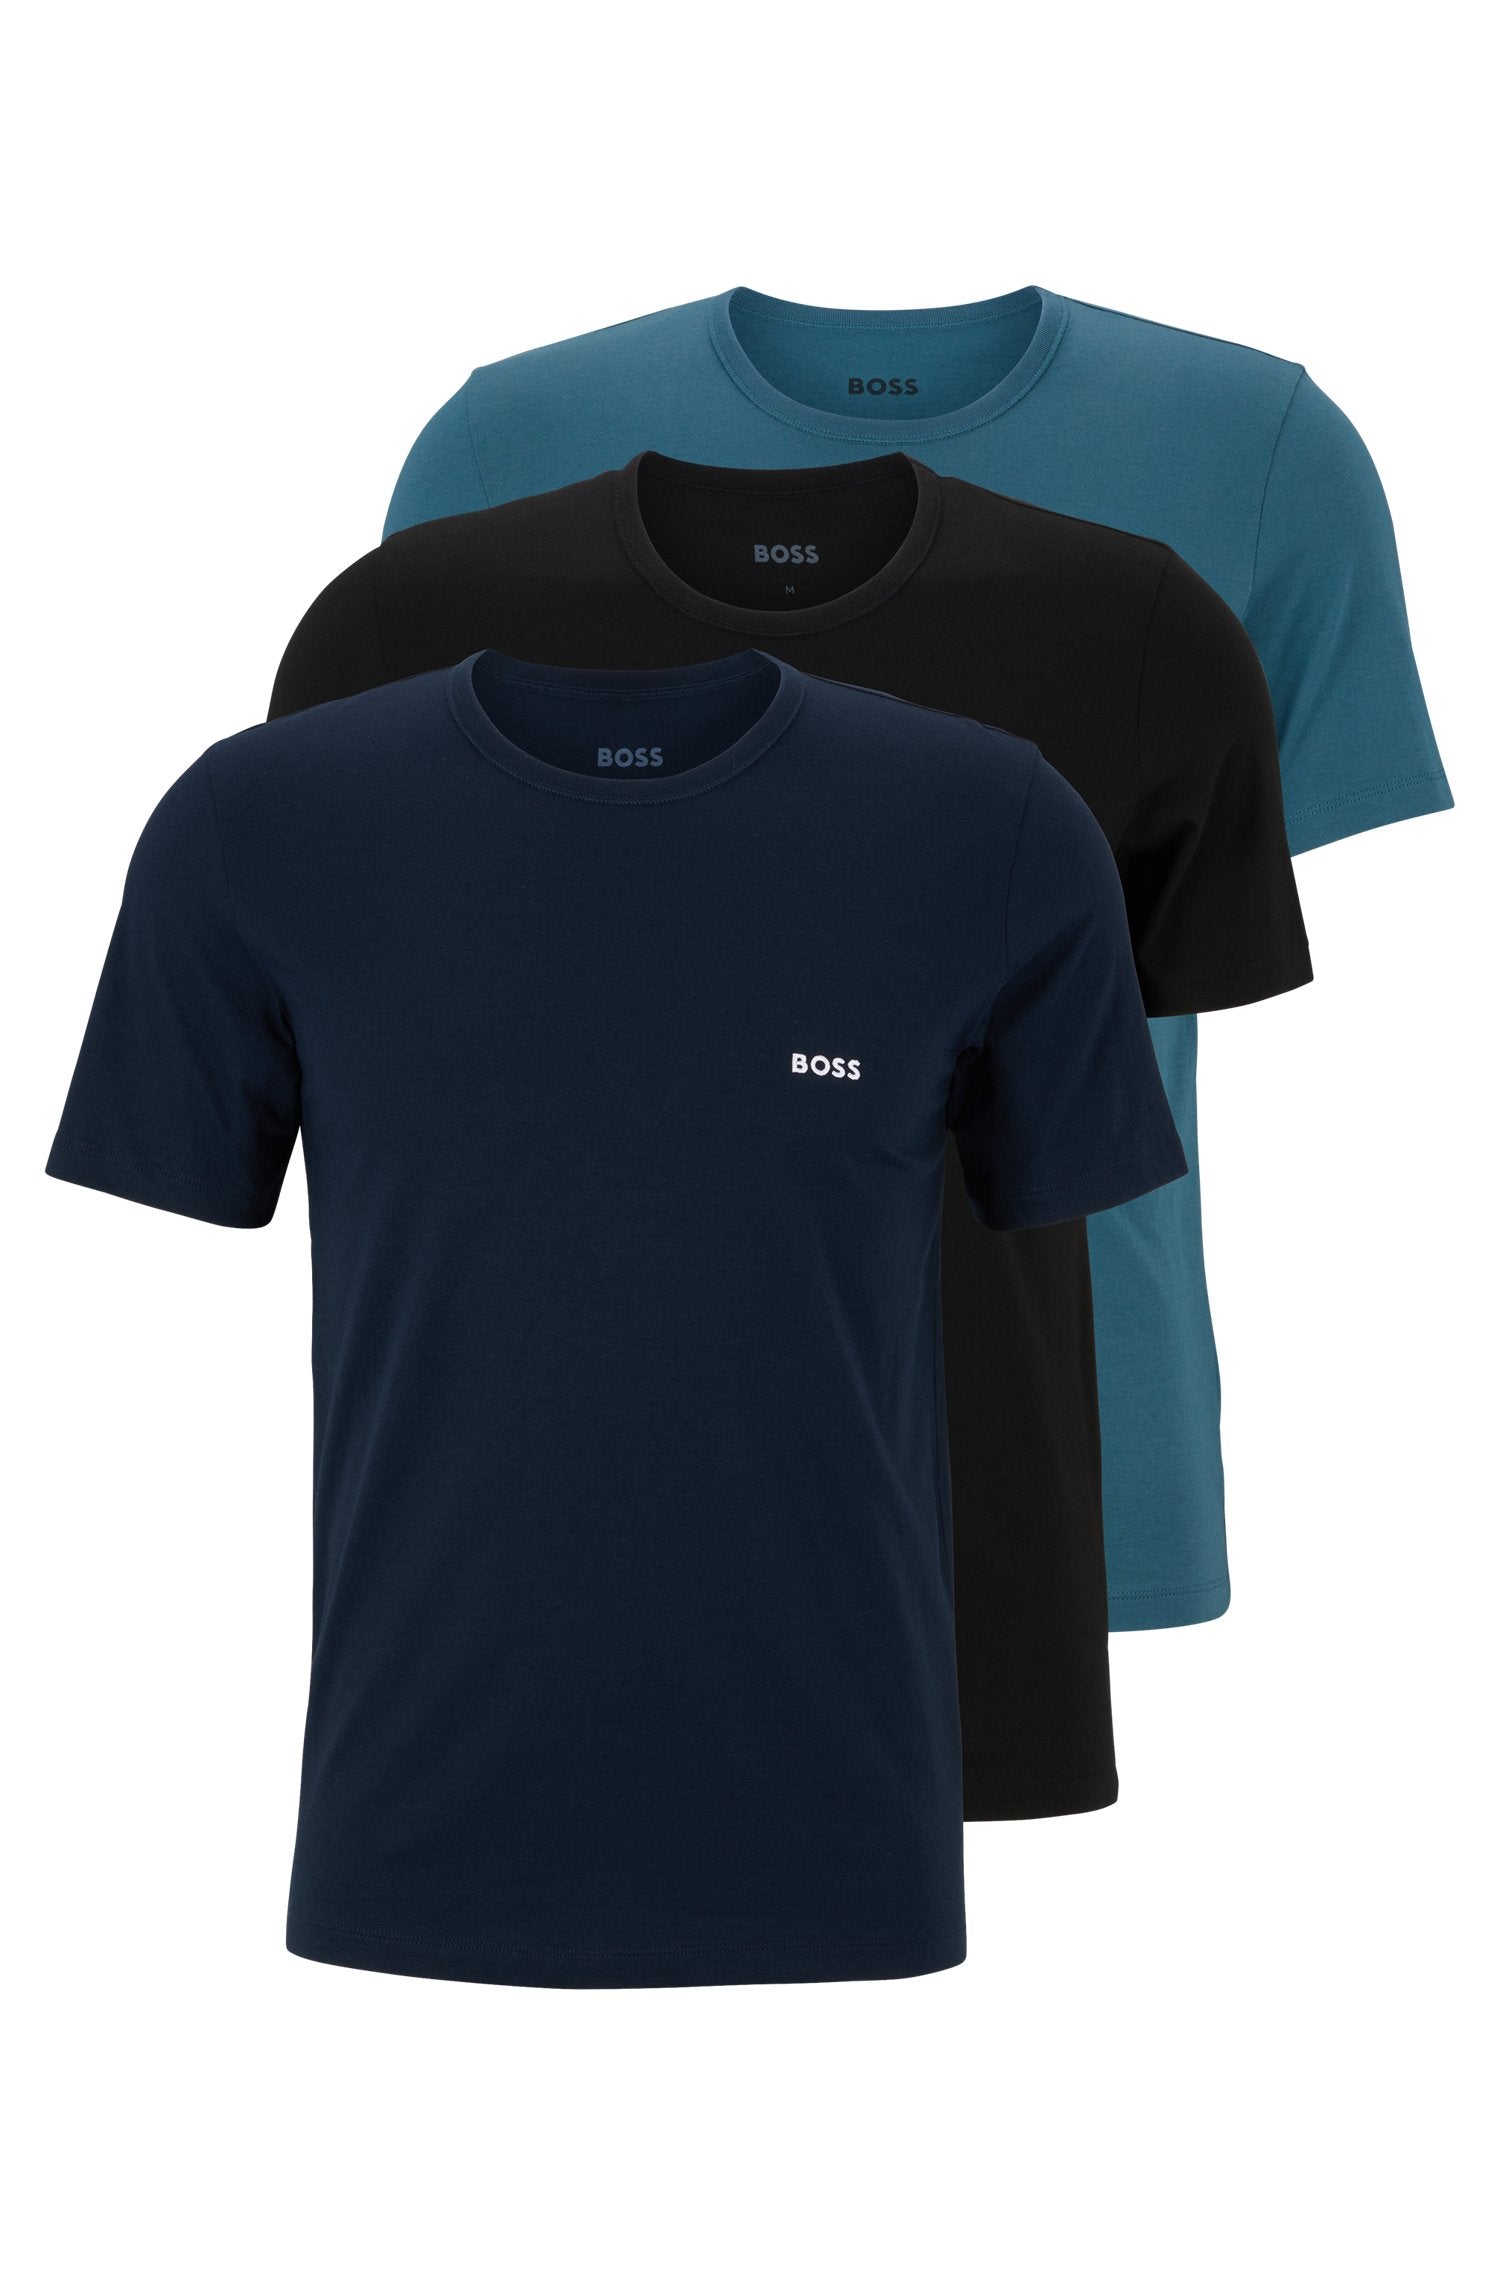 BOSS - 3-Pack Of T-Shirts In Jersey Cotton In Black, Navy and Teal 50475286 972